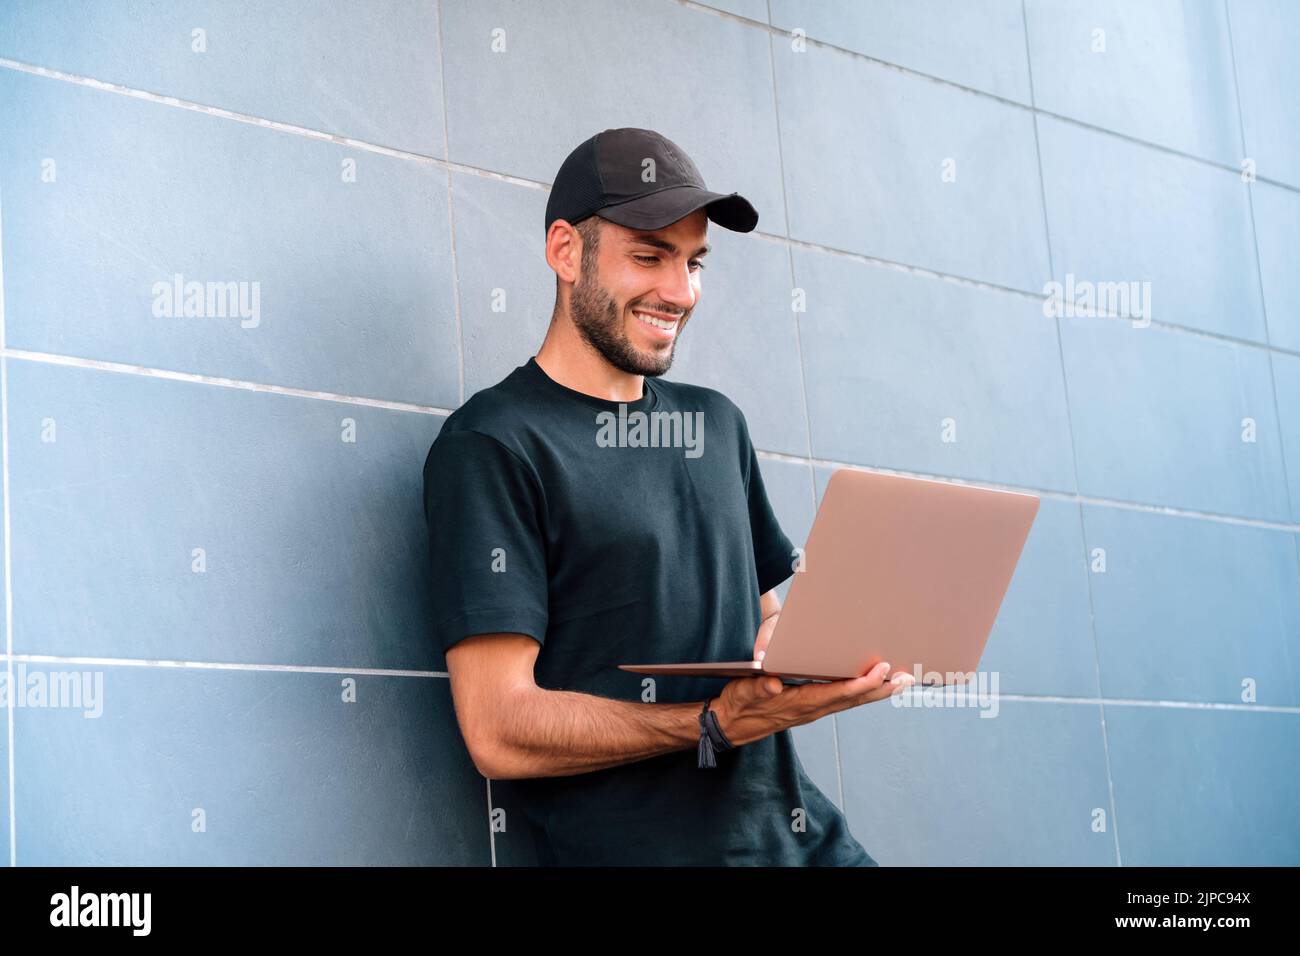 Low angle of cheerful young man in black t shirt and cap smiling and browsing netbook while leaning on tiled wall of modern building on city street Stock Photo